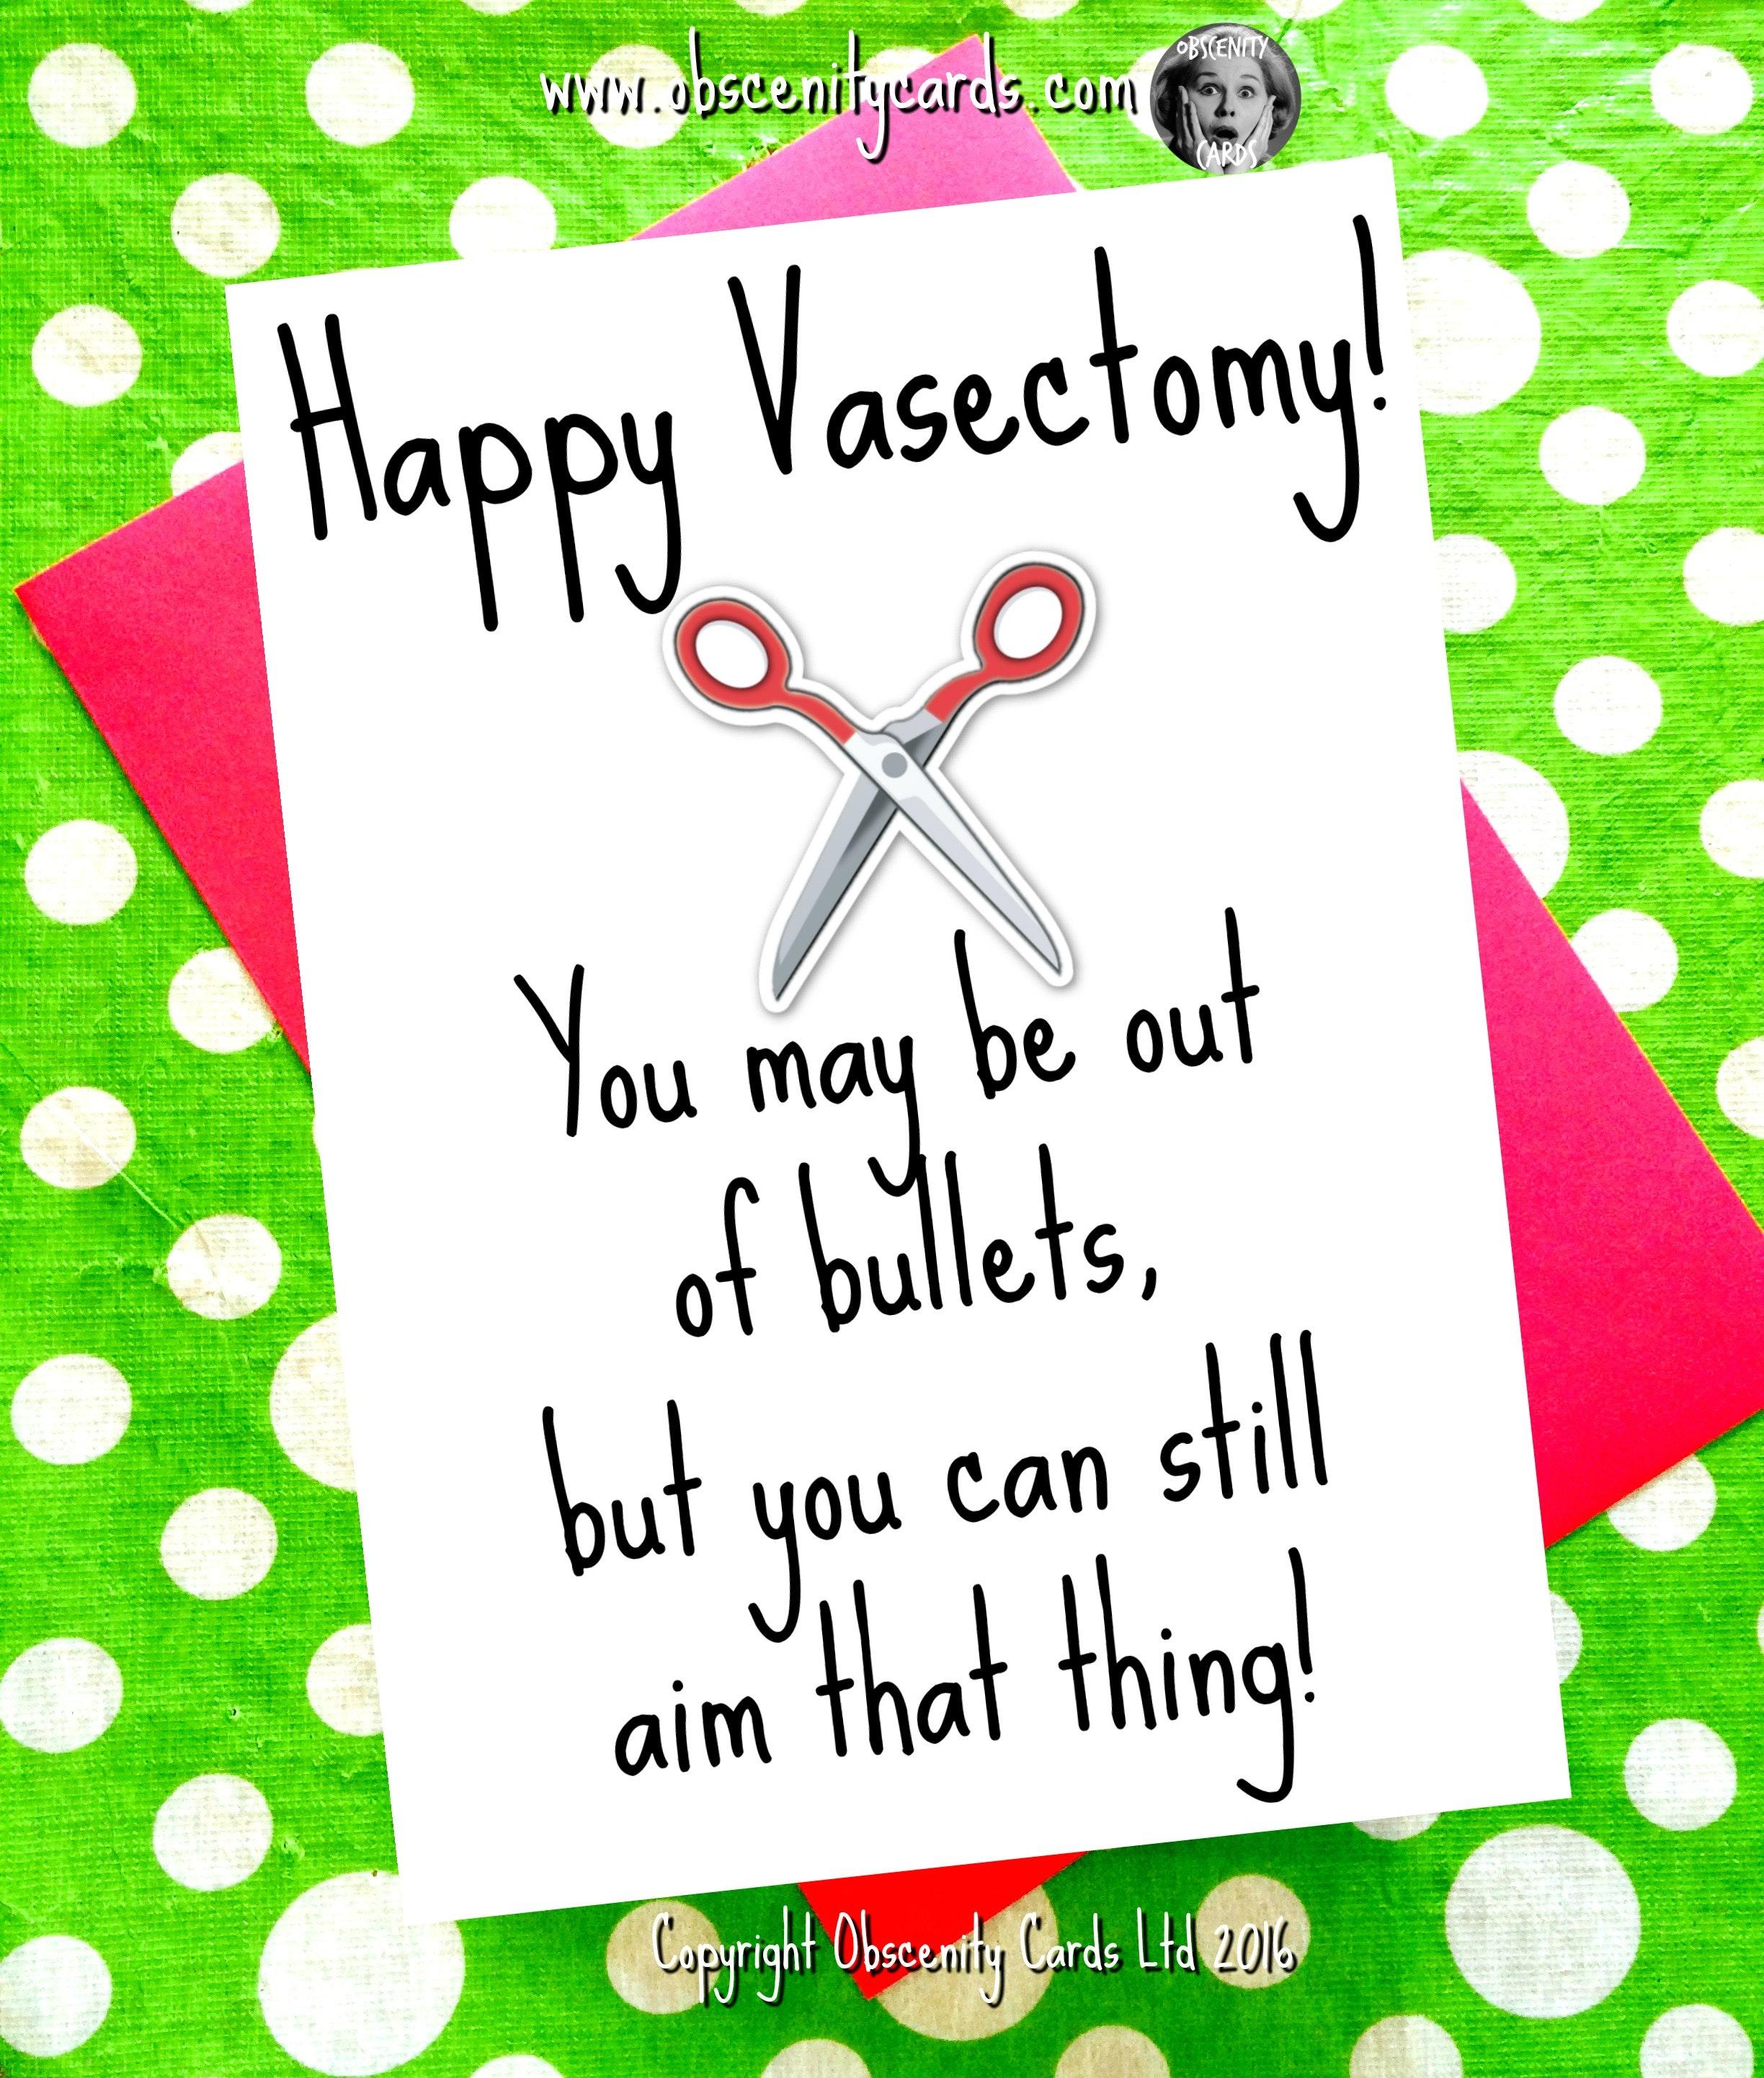 Funny Vasectomy Card You May Be Out Of Bullets But You Can Still Aim That Thing